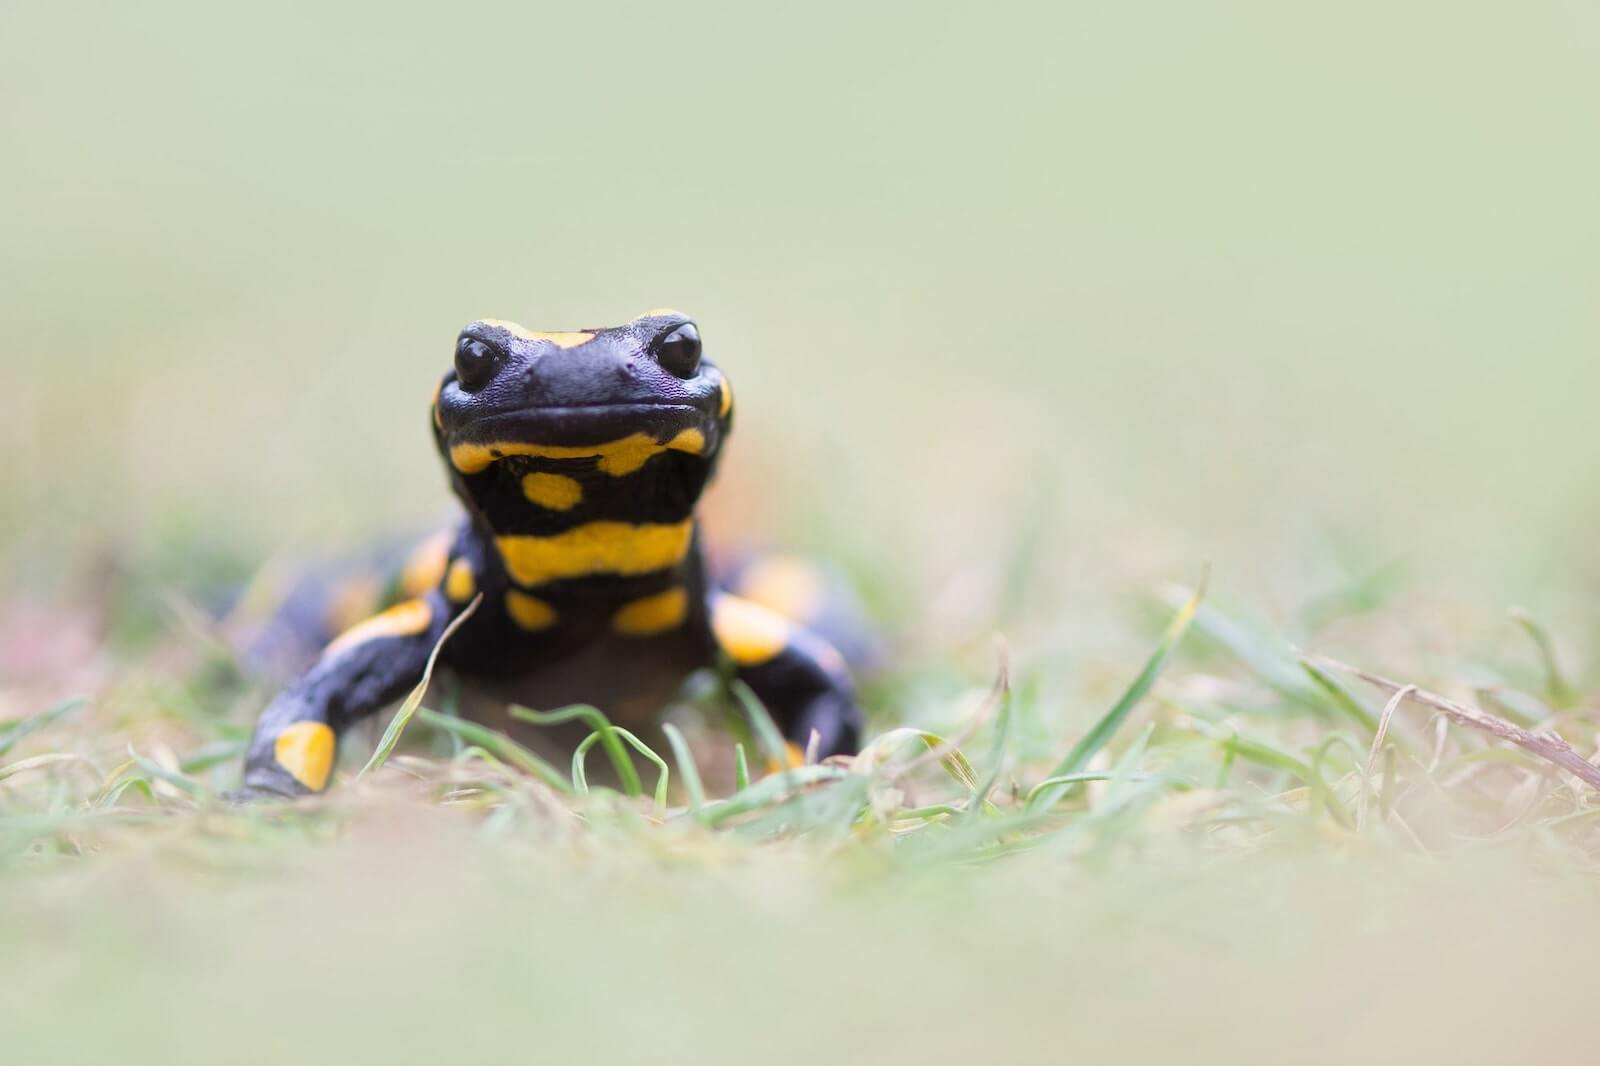 Image of a fire salamander in the wild